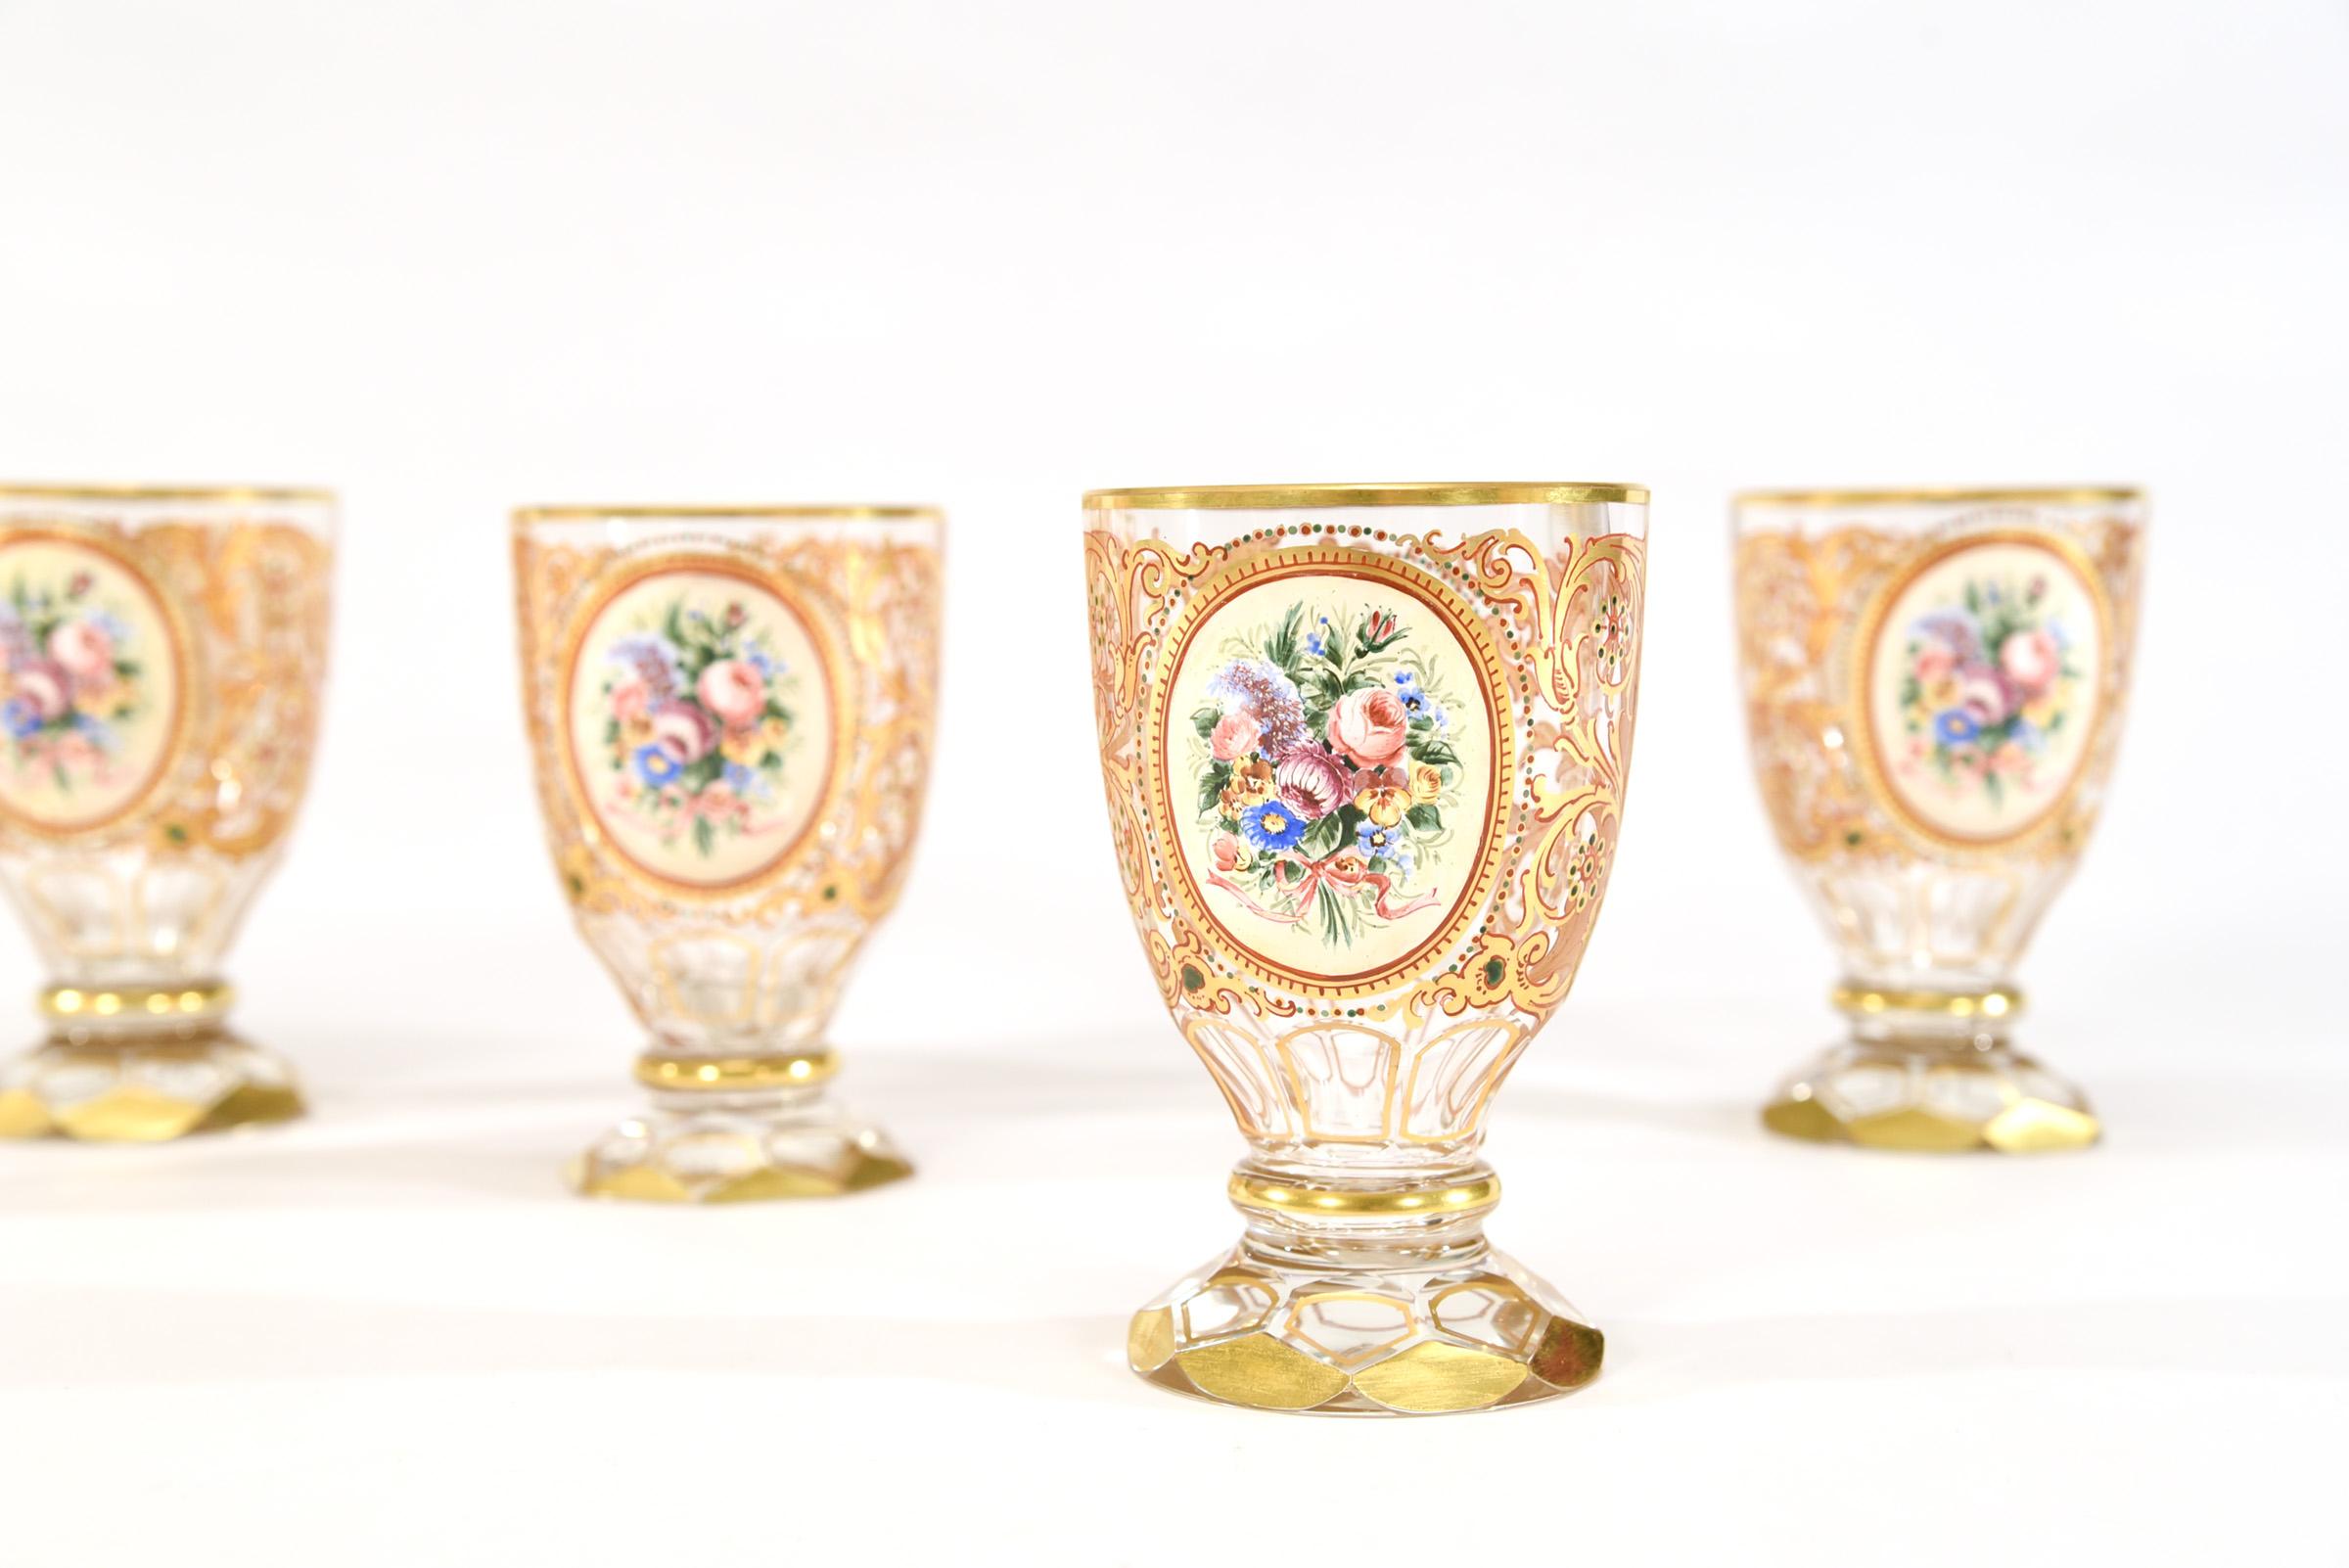 A rare and elegant set of 12 Bohemian ( and possibly Russian) hand blown tumblers with facet cut base and gilt trim. Each piece is decorated with hand painted floral reserves in polychrome enamels and further decorated in gold around the